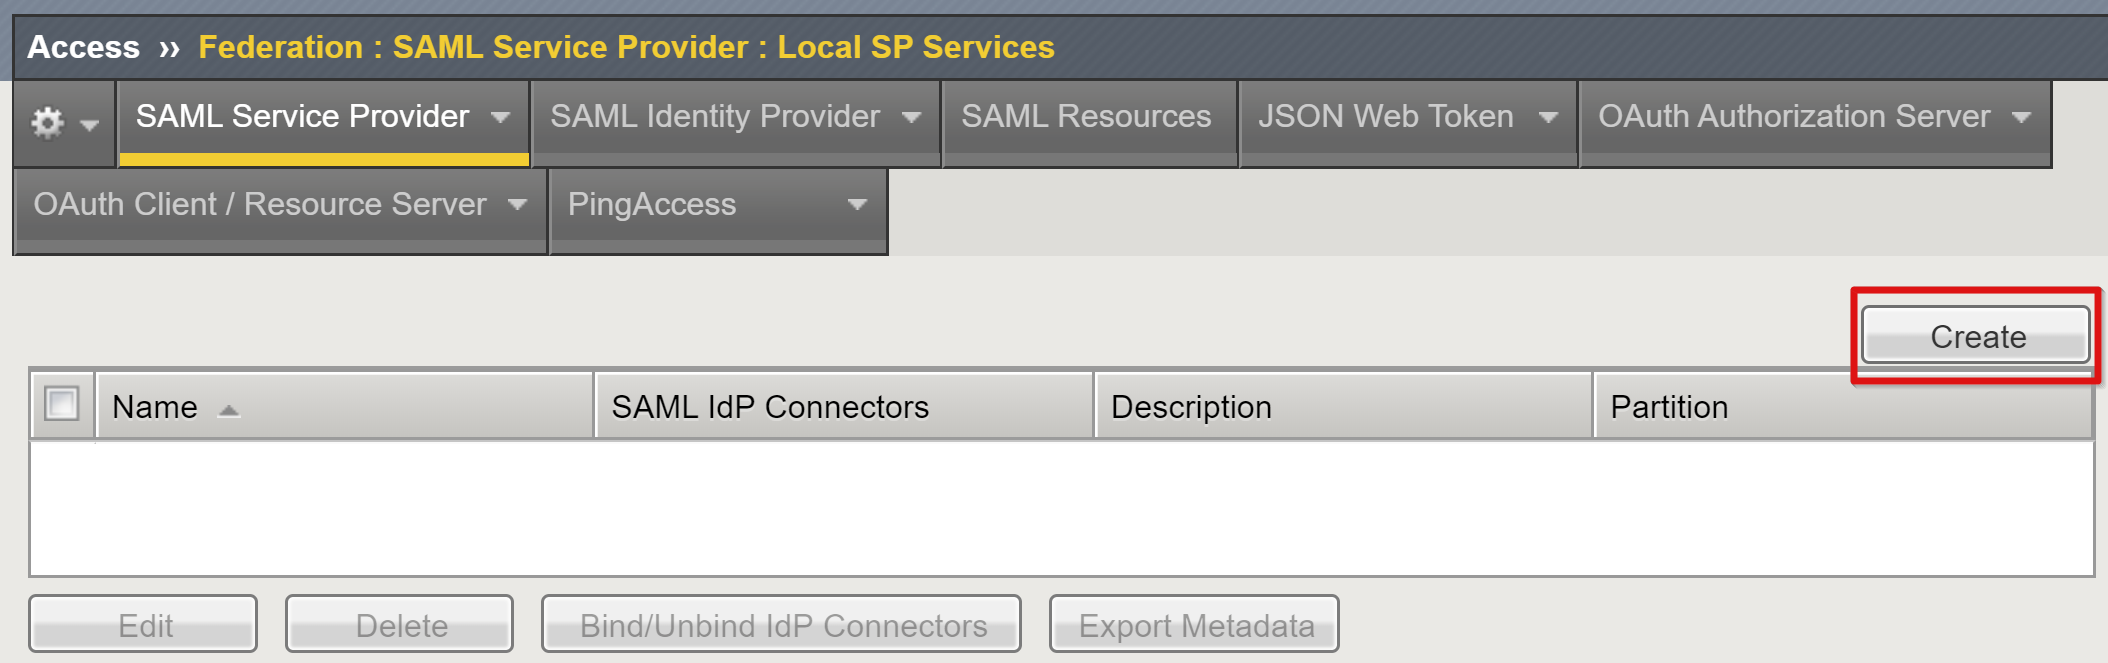 Screenshot of the Create option on the Local SP Services page.